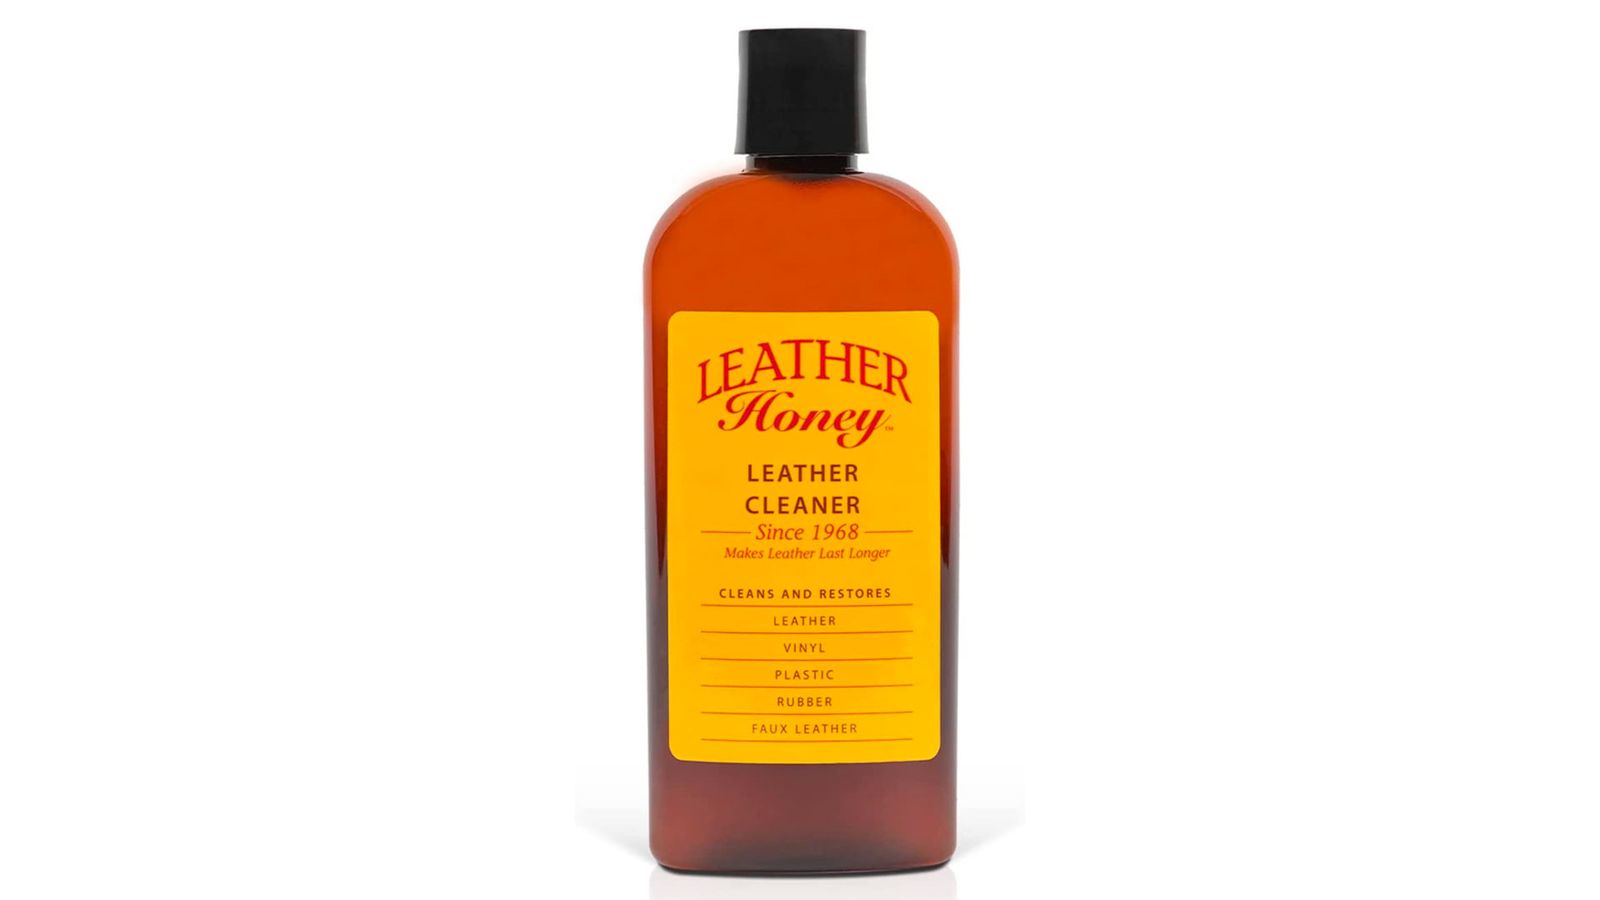 Leather Honey Leather Cleaner product image of a brown bottle with a black cap and yellow labelling.